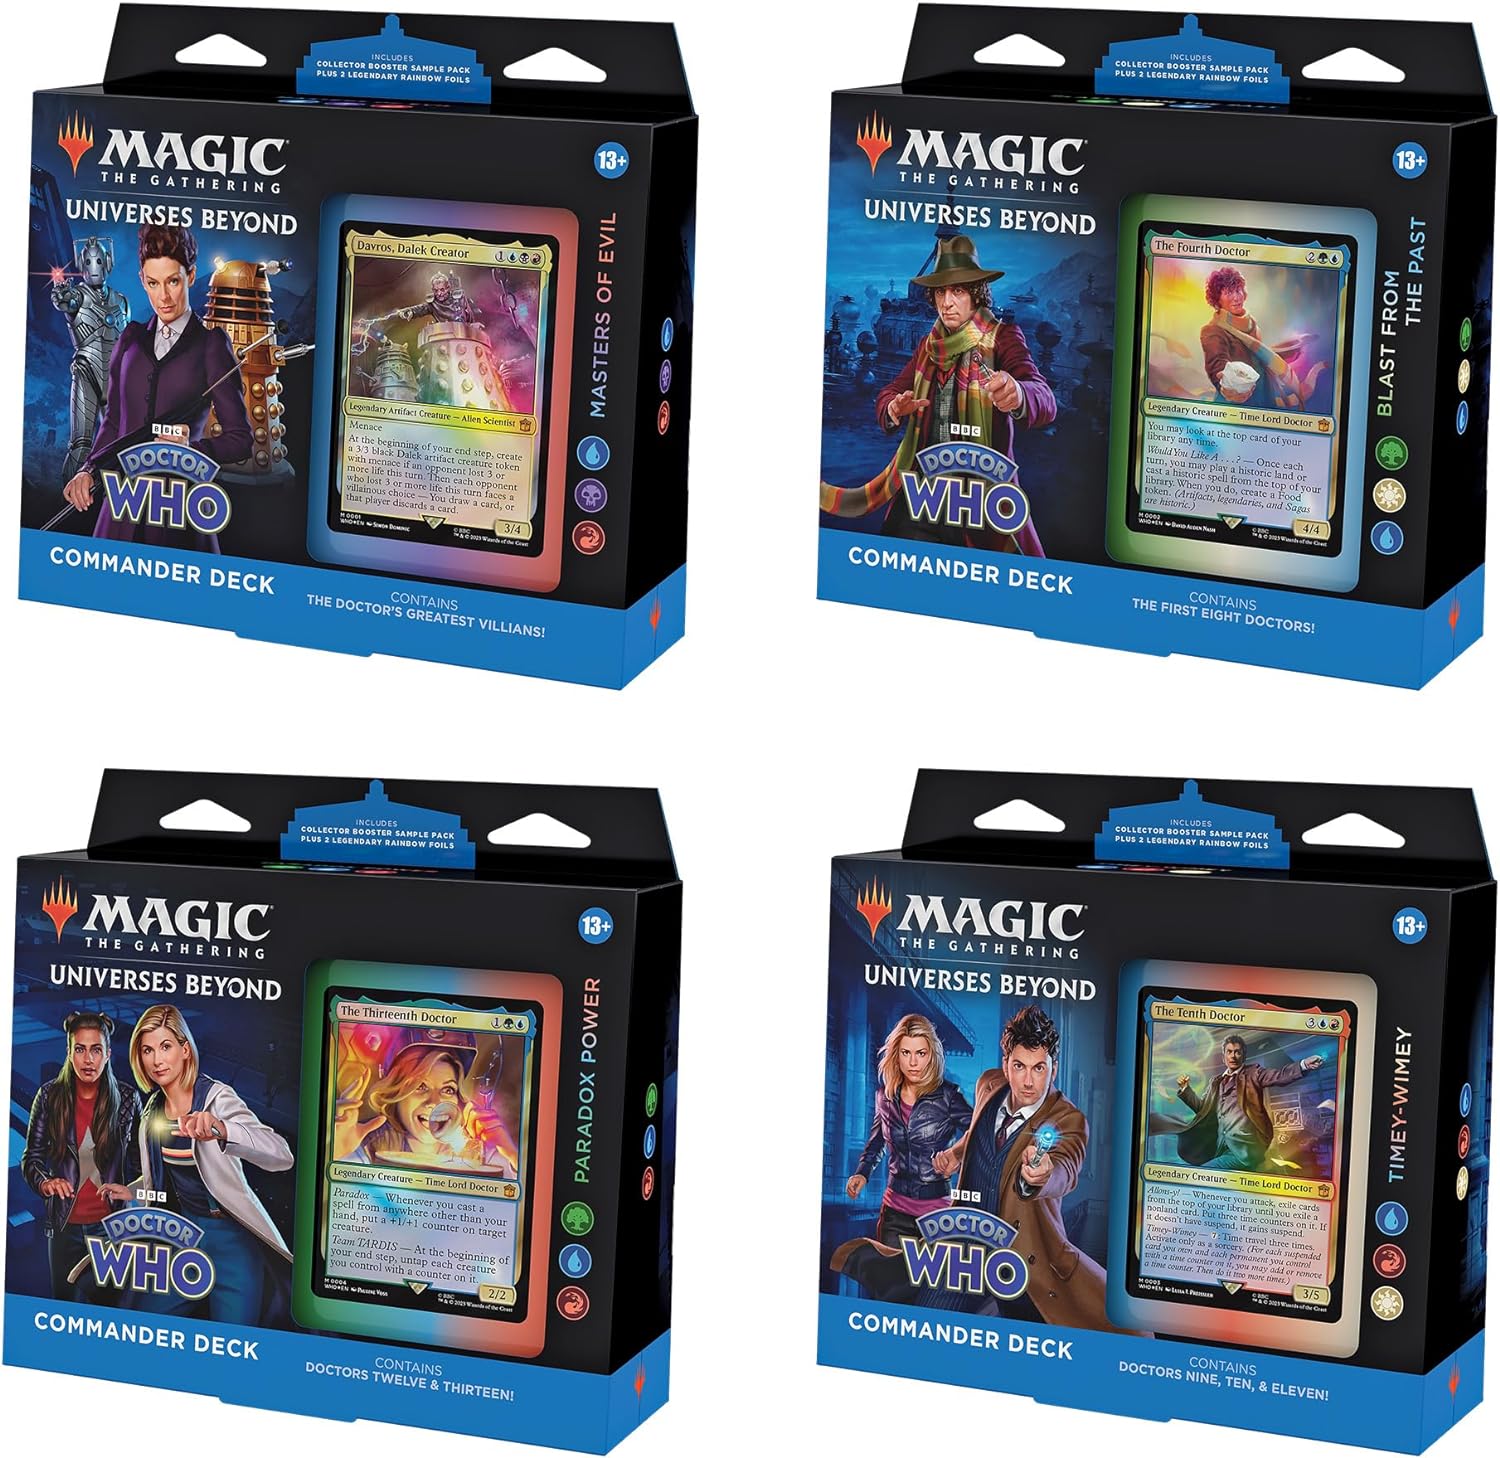 Magic the Gathering: Universe Beyond Doctor Who Commander Deck